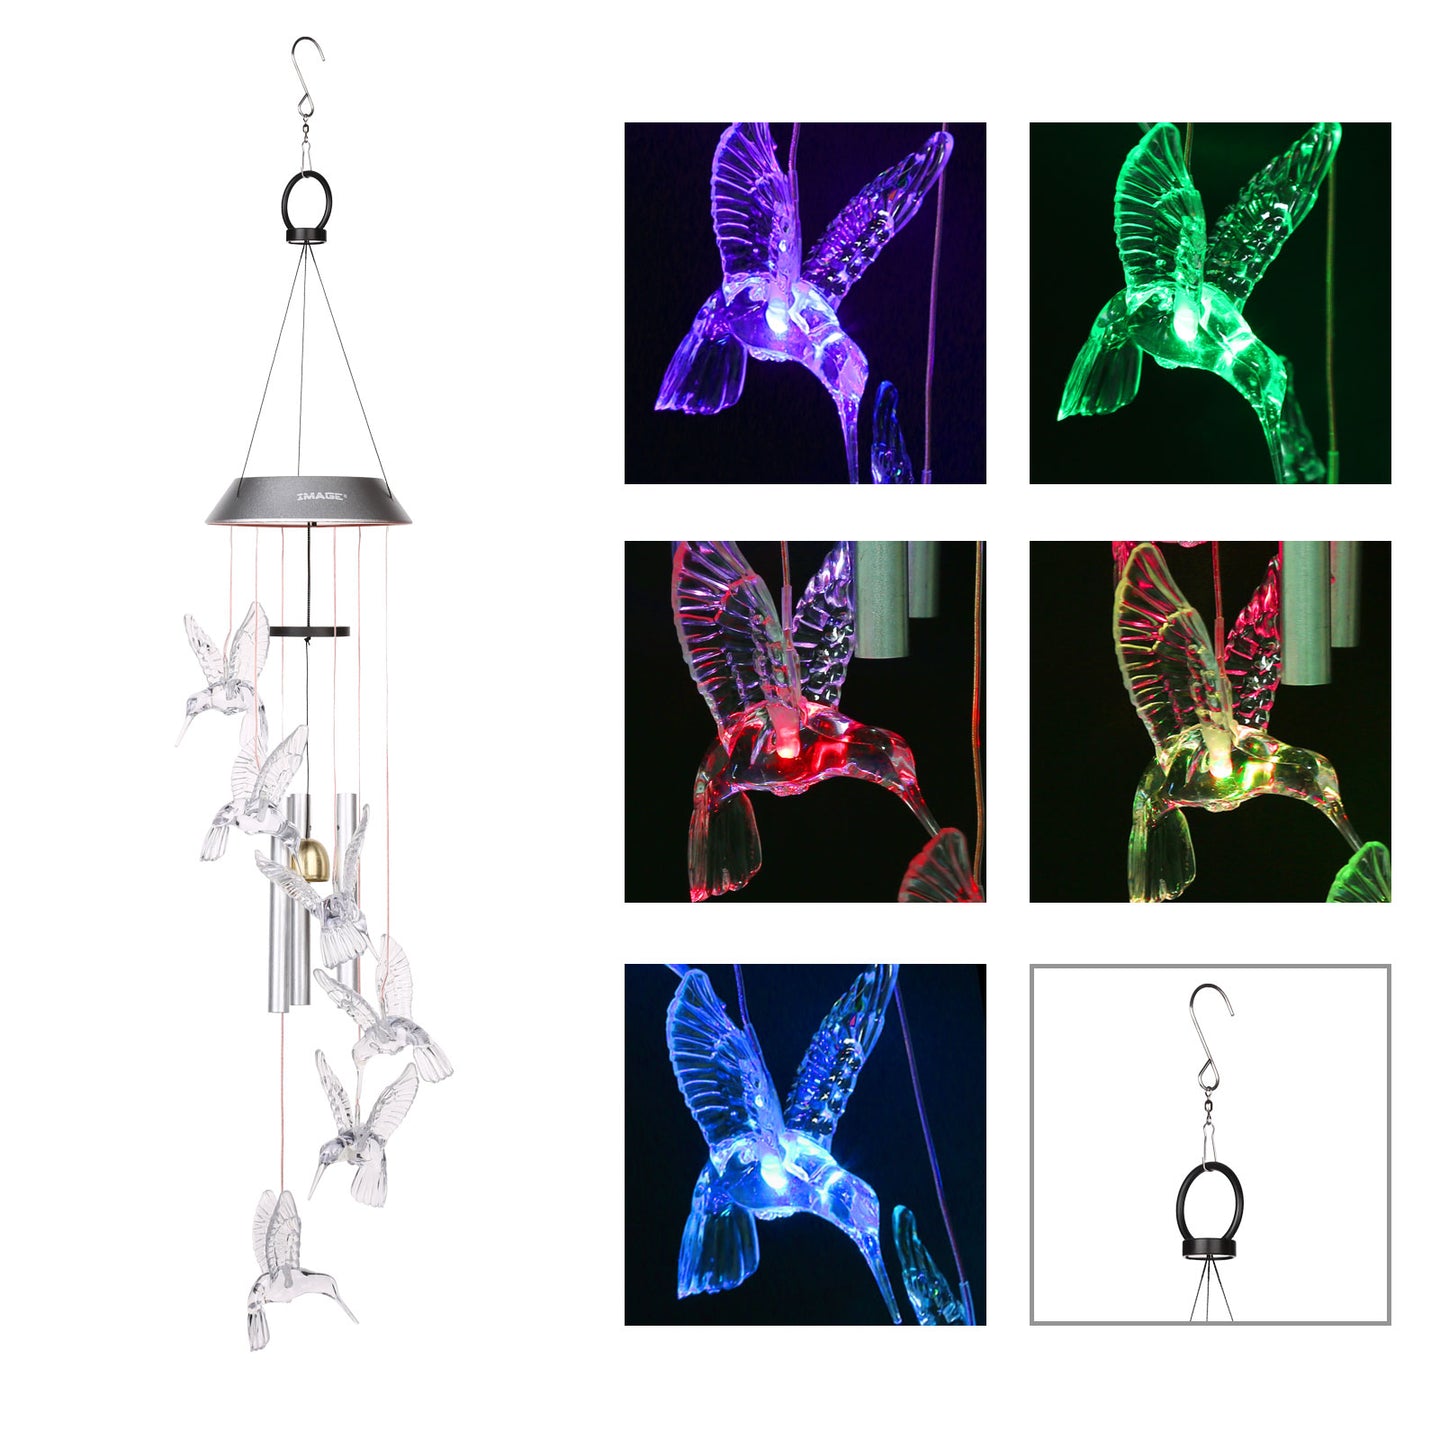 Wind Chimes Solar Hummingbird Wind Chime with Metal Tubes Color Changing Lights Outdoor Solar Lights Hanging Decorative Garden Lights Xmas Gifts for Decor Home Garden Patio Yard Indoor Outdoor